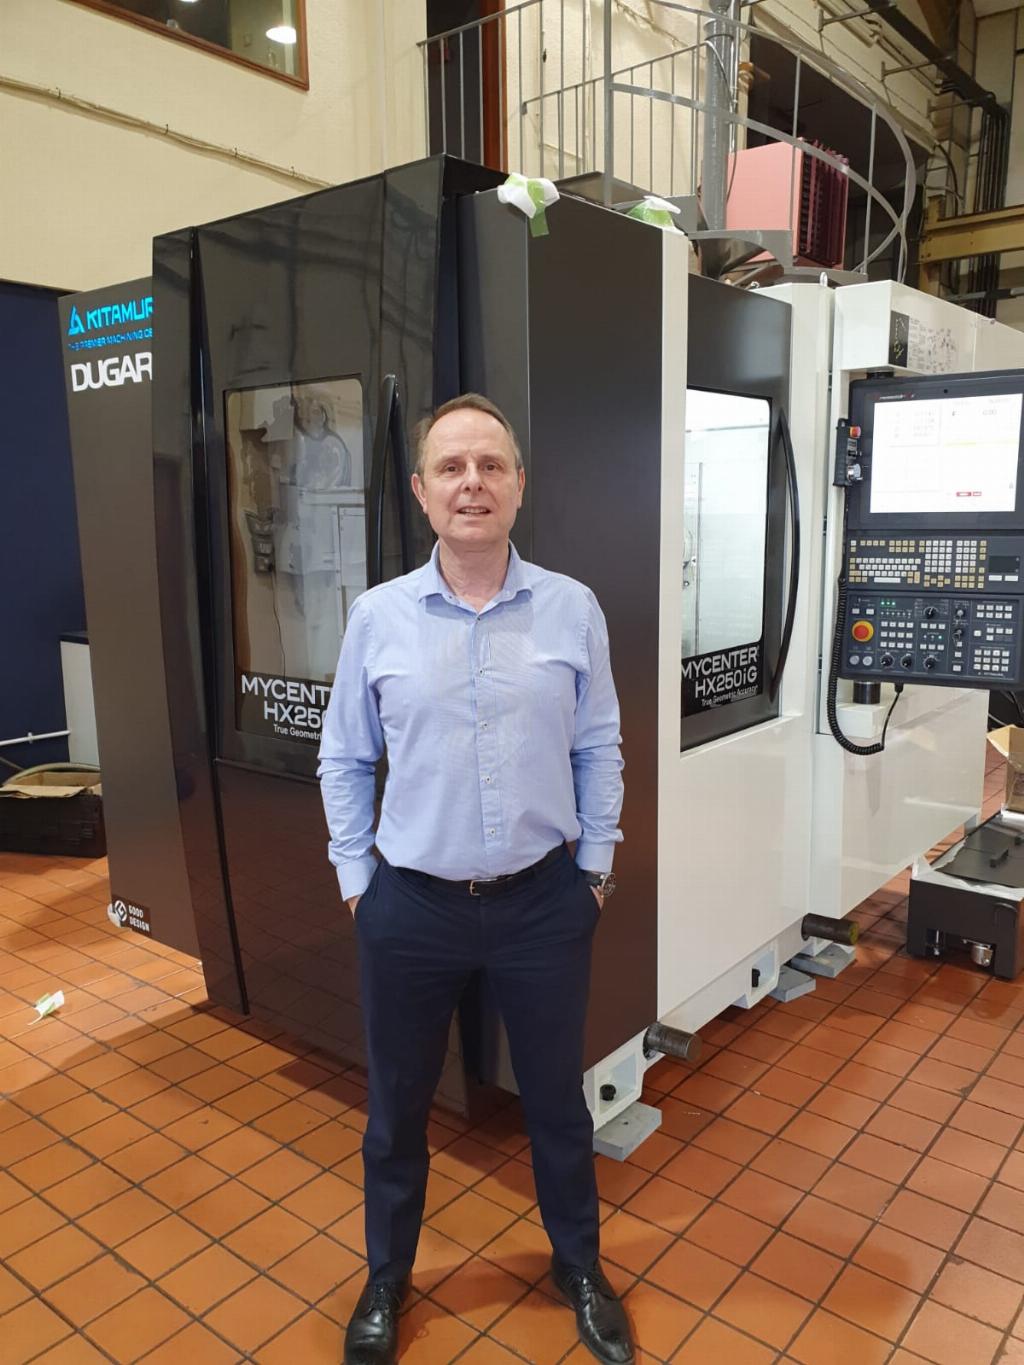 Managing director Eric Dugard is delighted that the company has recently been appointed as the exclusive supplier of Kitamura machines in the UK